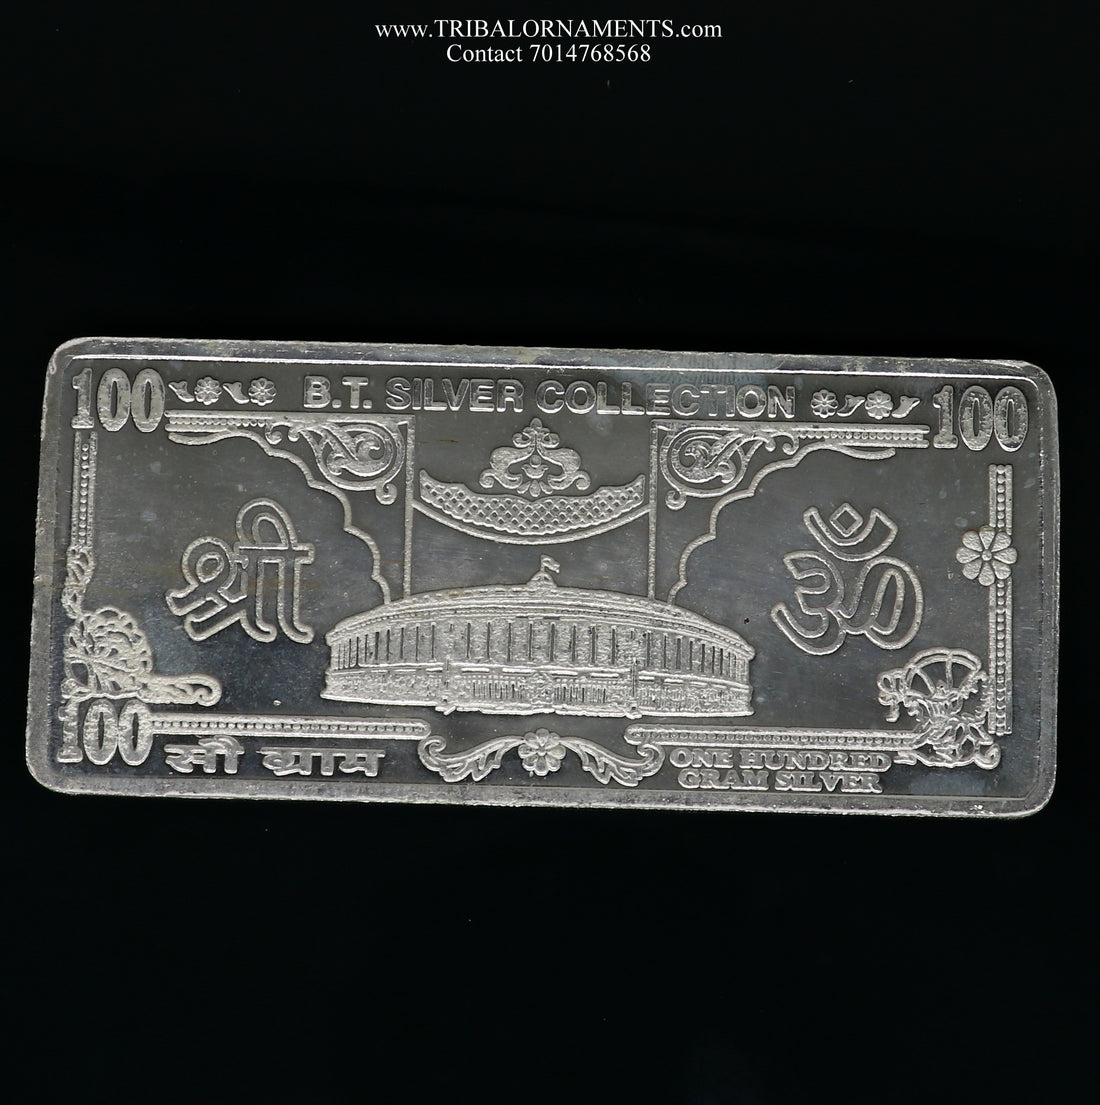 pure  92.5 Purity | Silver Note | Silver bar of 5g, 10g, 20g, 100g | Silver Bar Pure for diwali. - TRIBAL ORNAMENTS